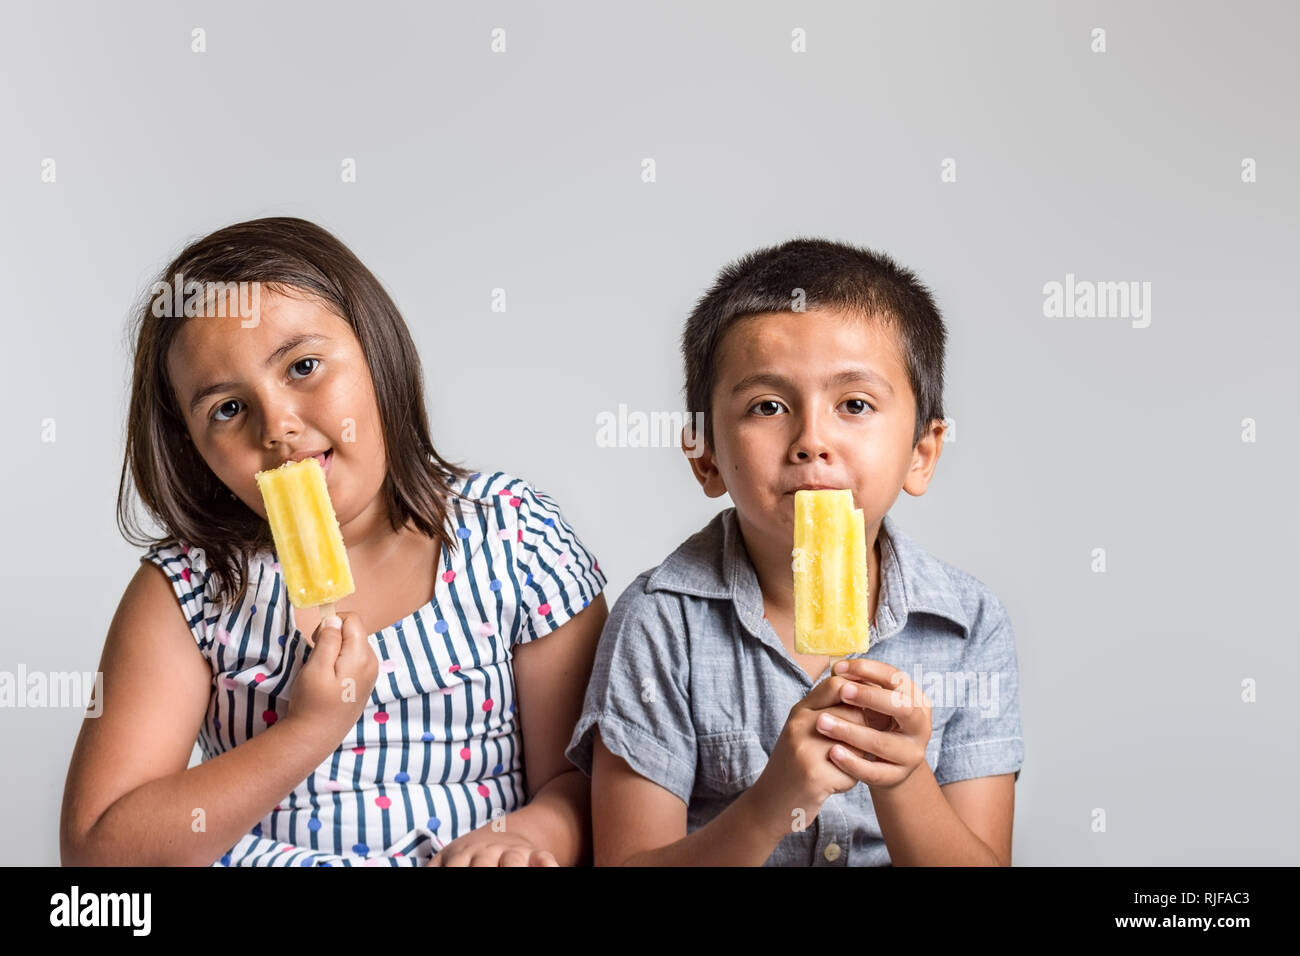 Young boy and girl with natural expression enjoying ice cream, studio image with copy space for text. Stock Photo